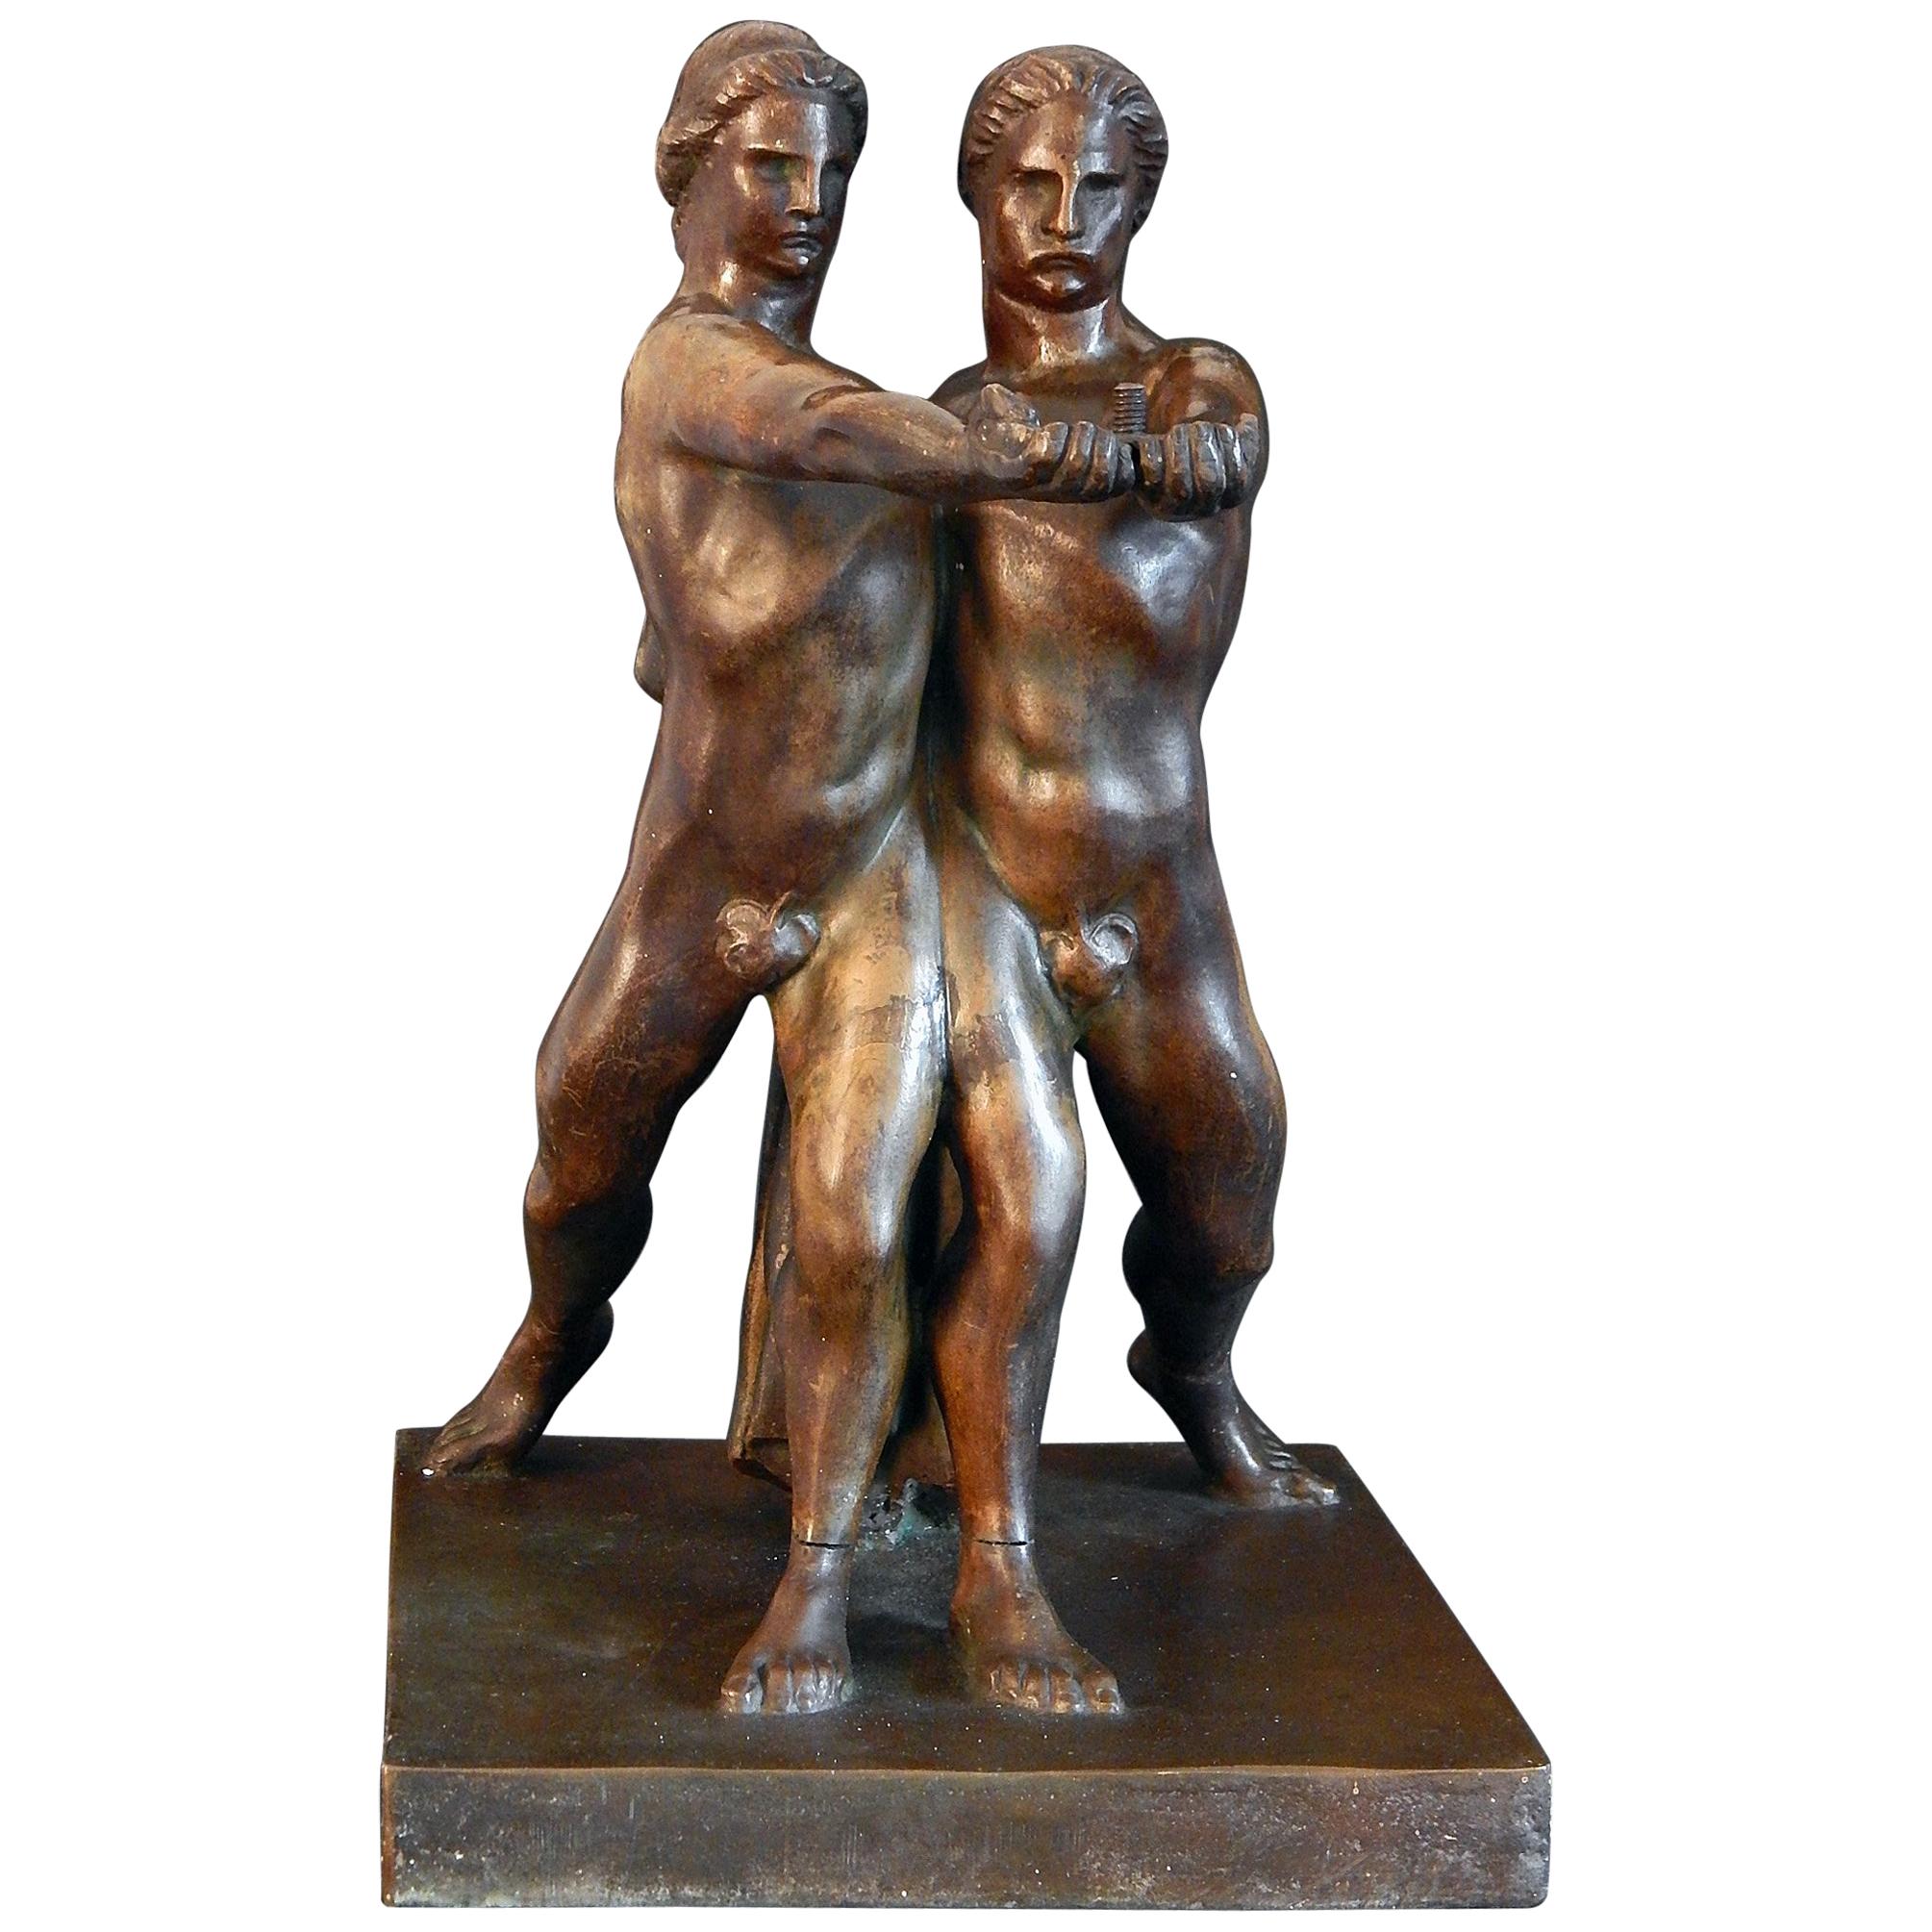 "Two Athletes in Unity, " Unique 1930s Italian Art Deco Sculpture with Male Nudes For Sale